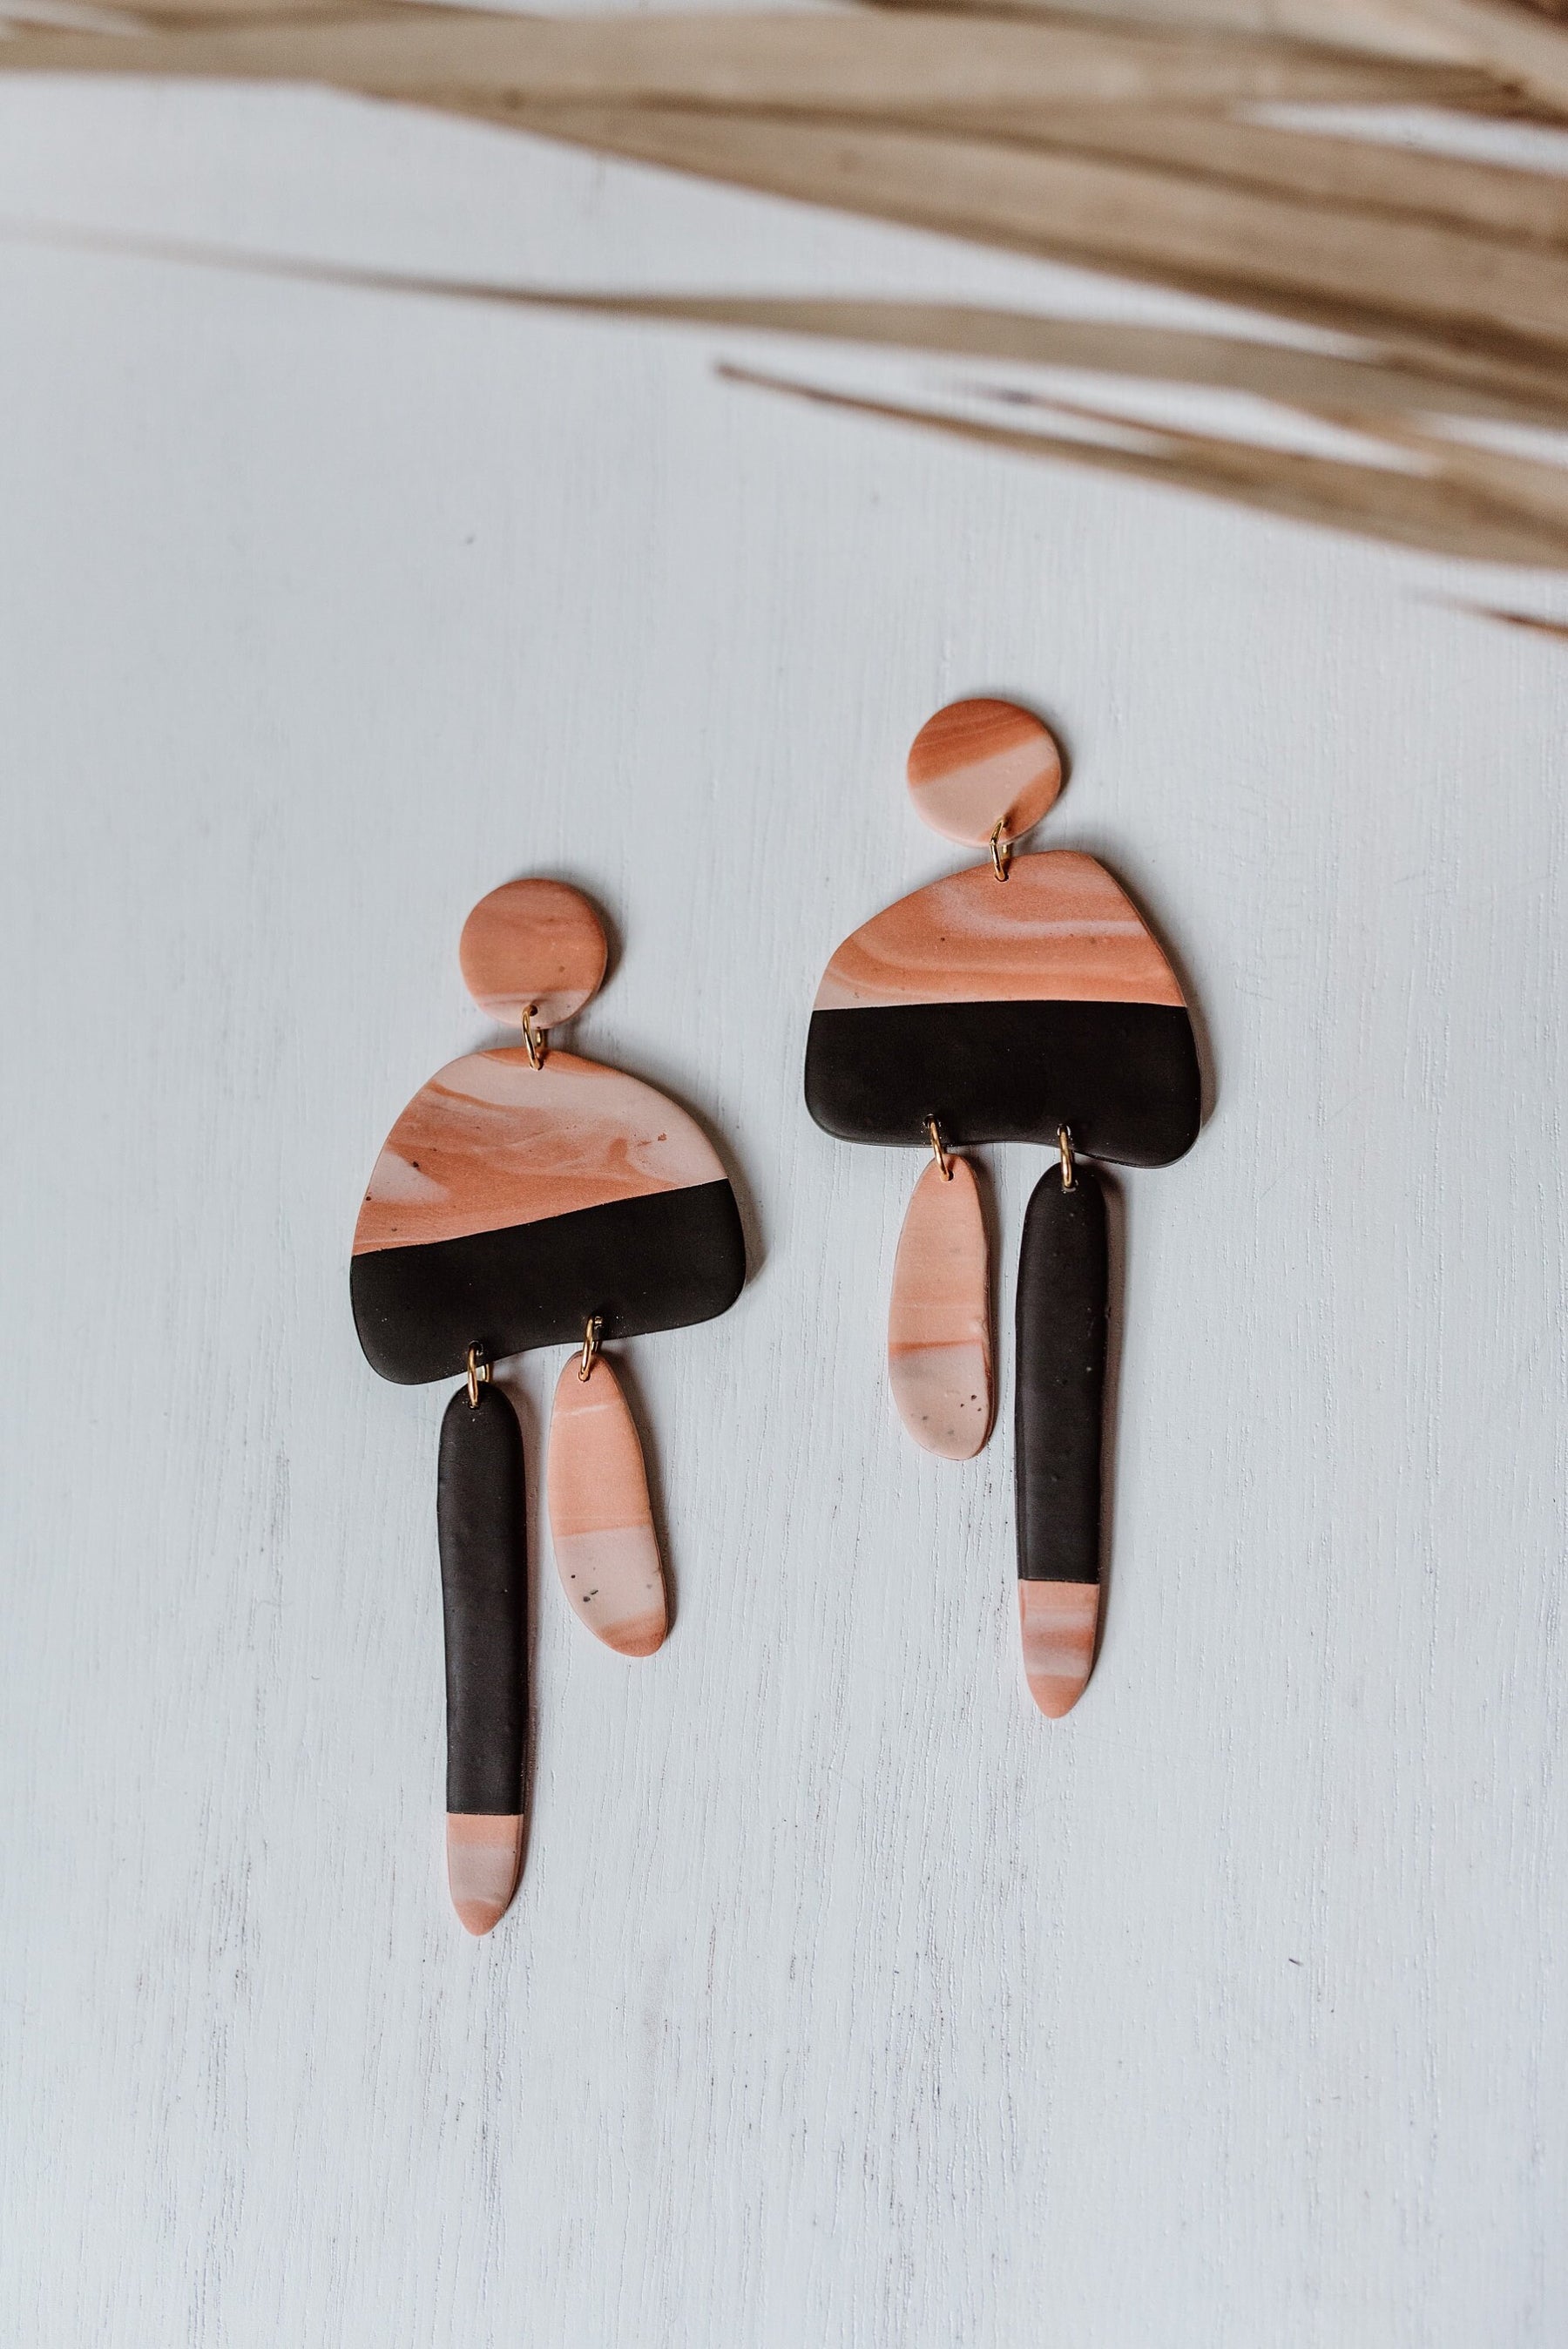 Abstract Orange and Black Mirrored Dangles | Polymer Clay Statement Earrings